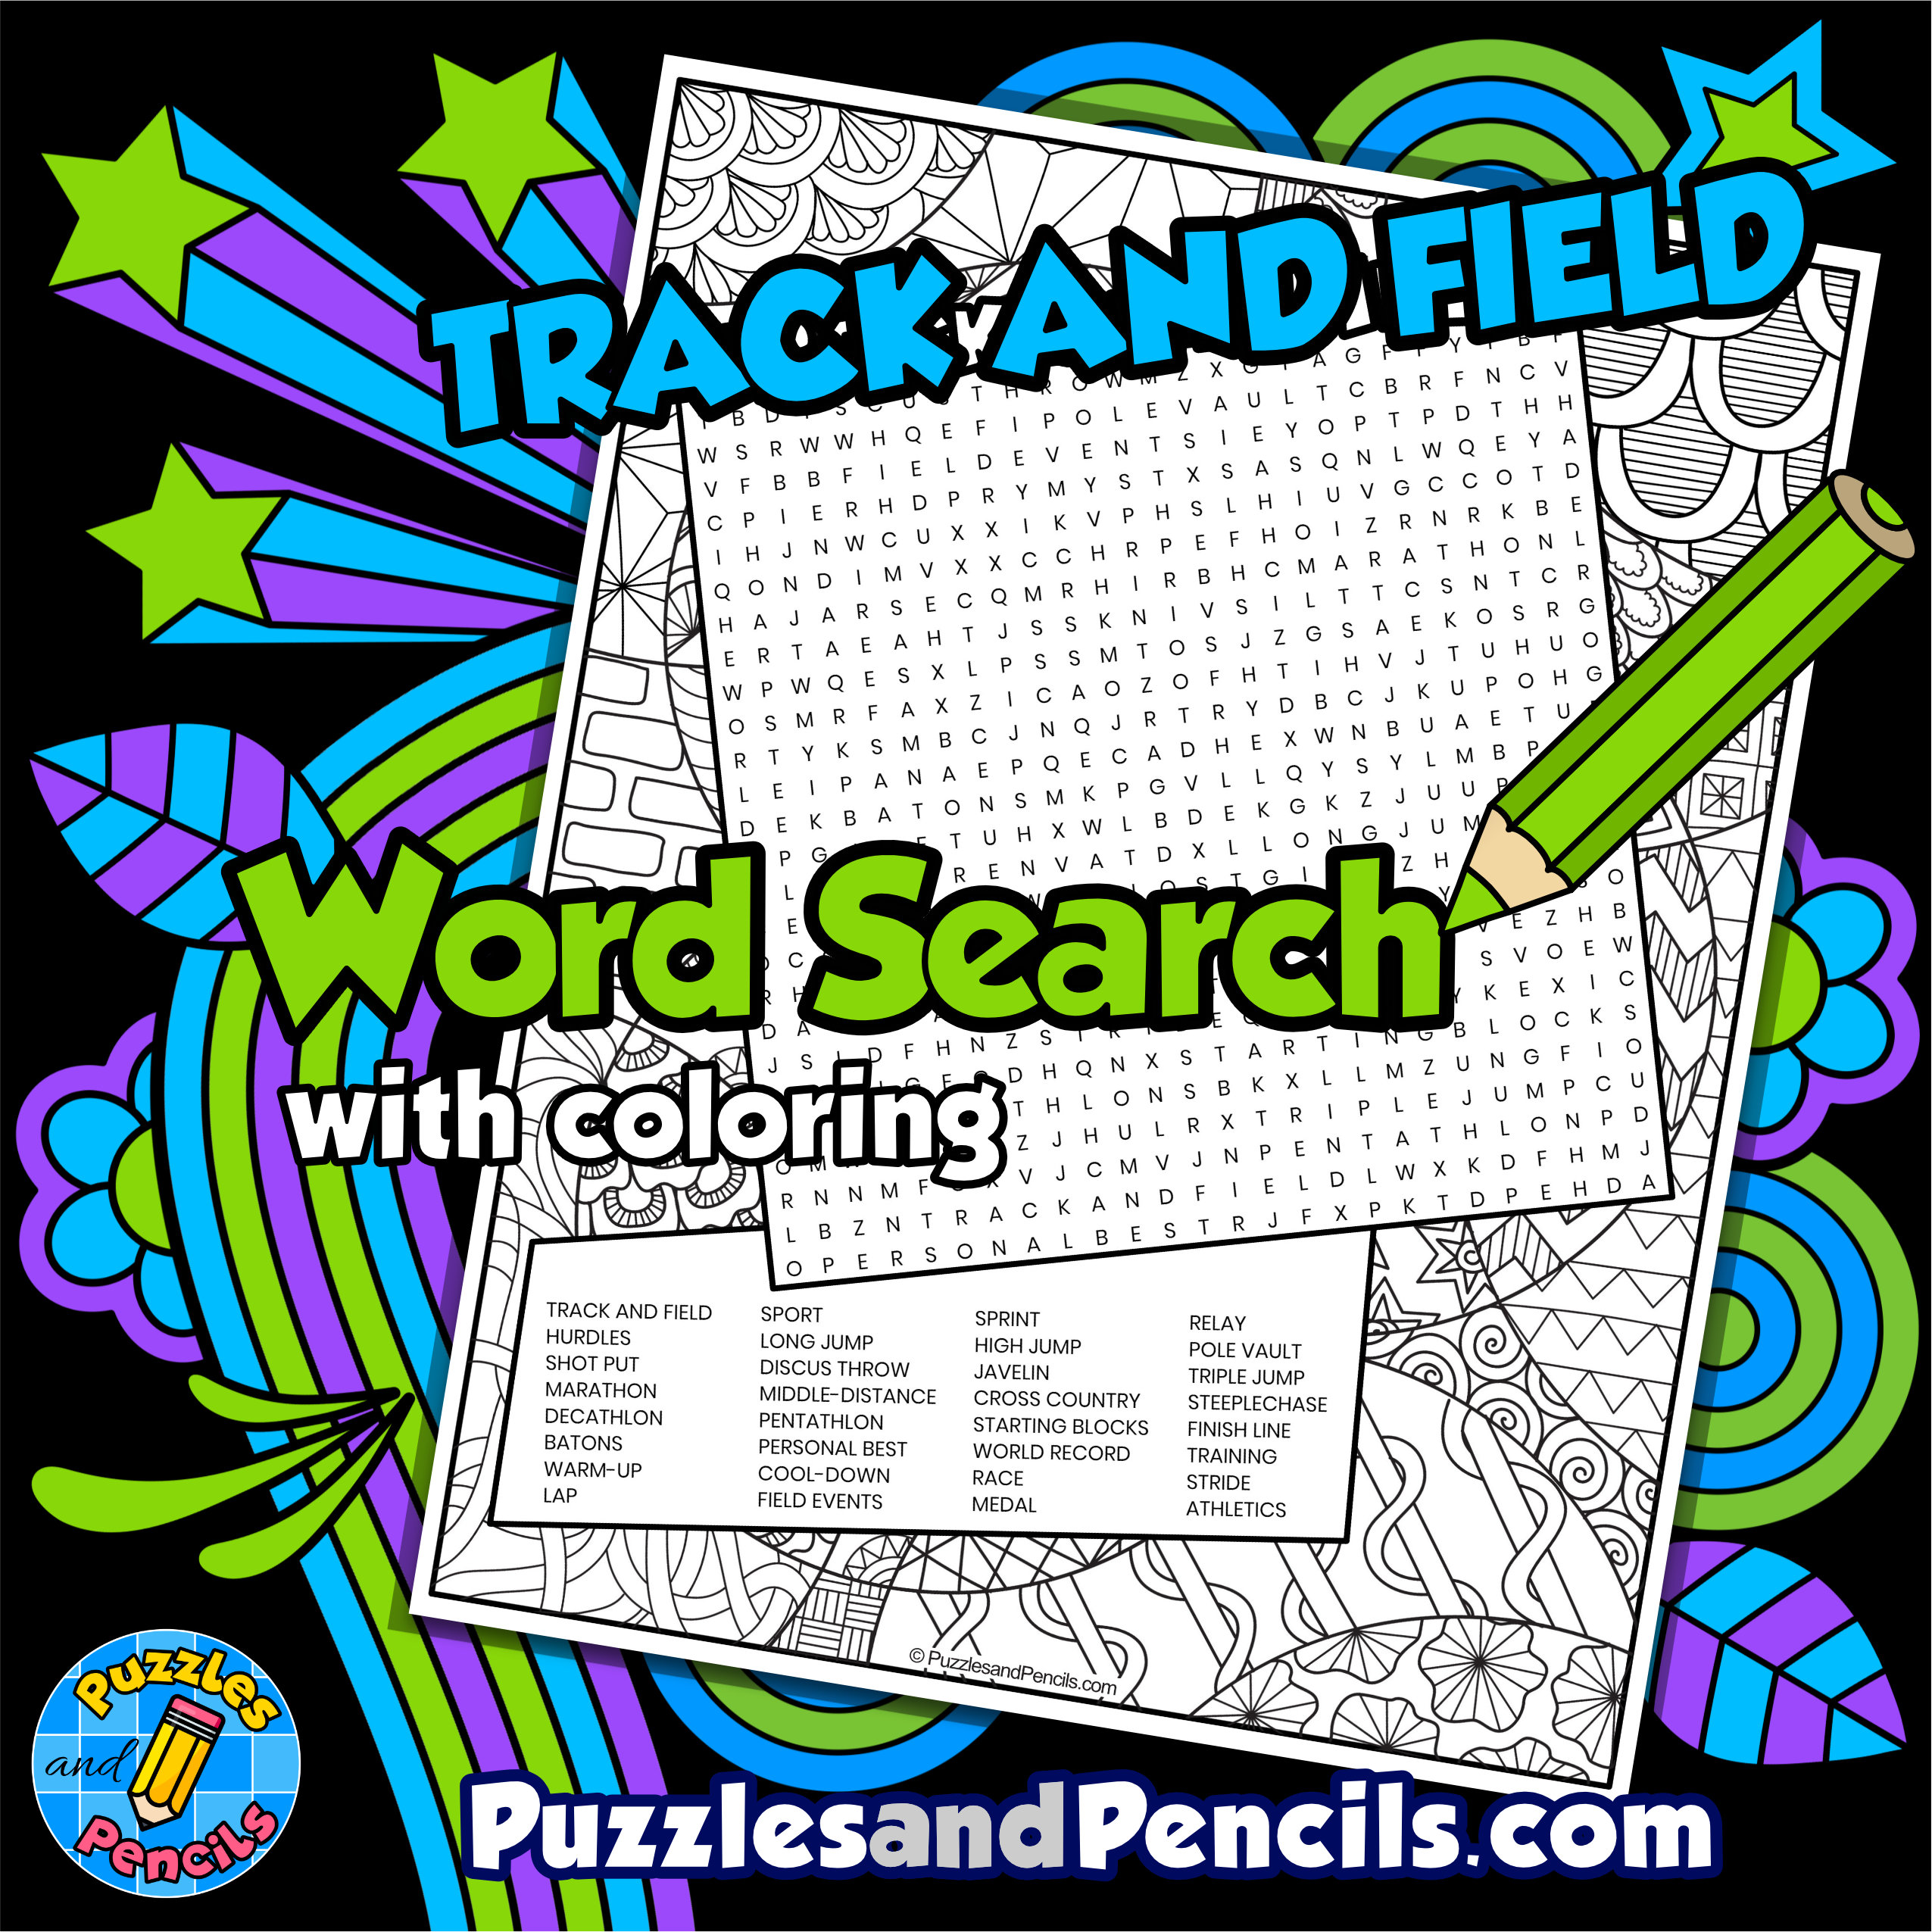 Track and field word search puzzle activity with coloring made by teachers